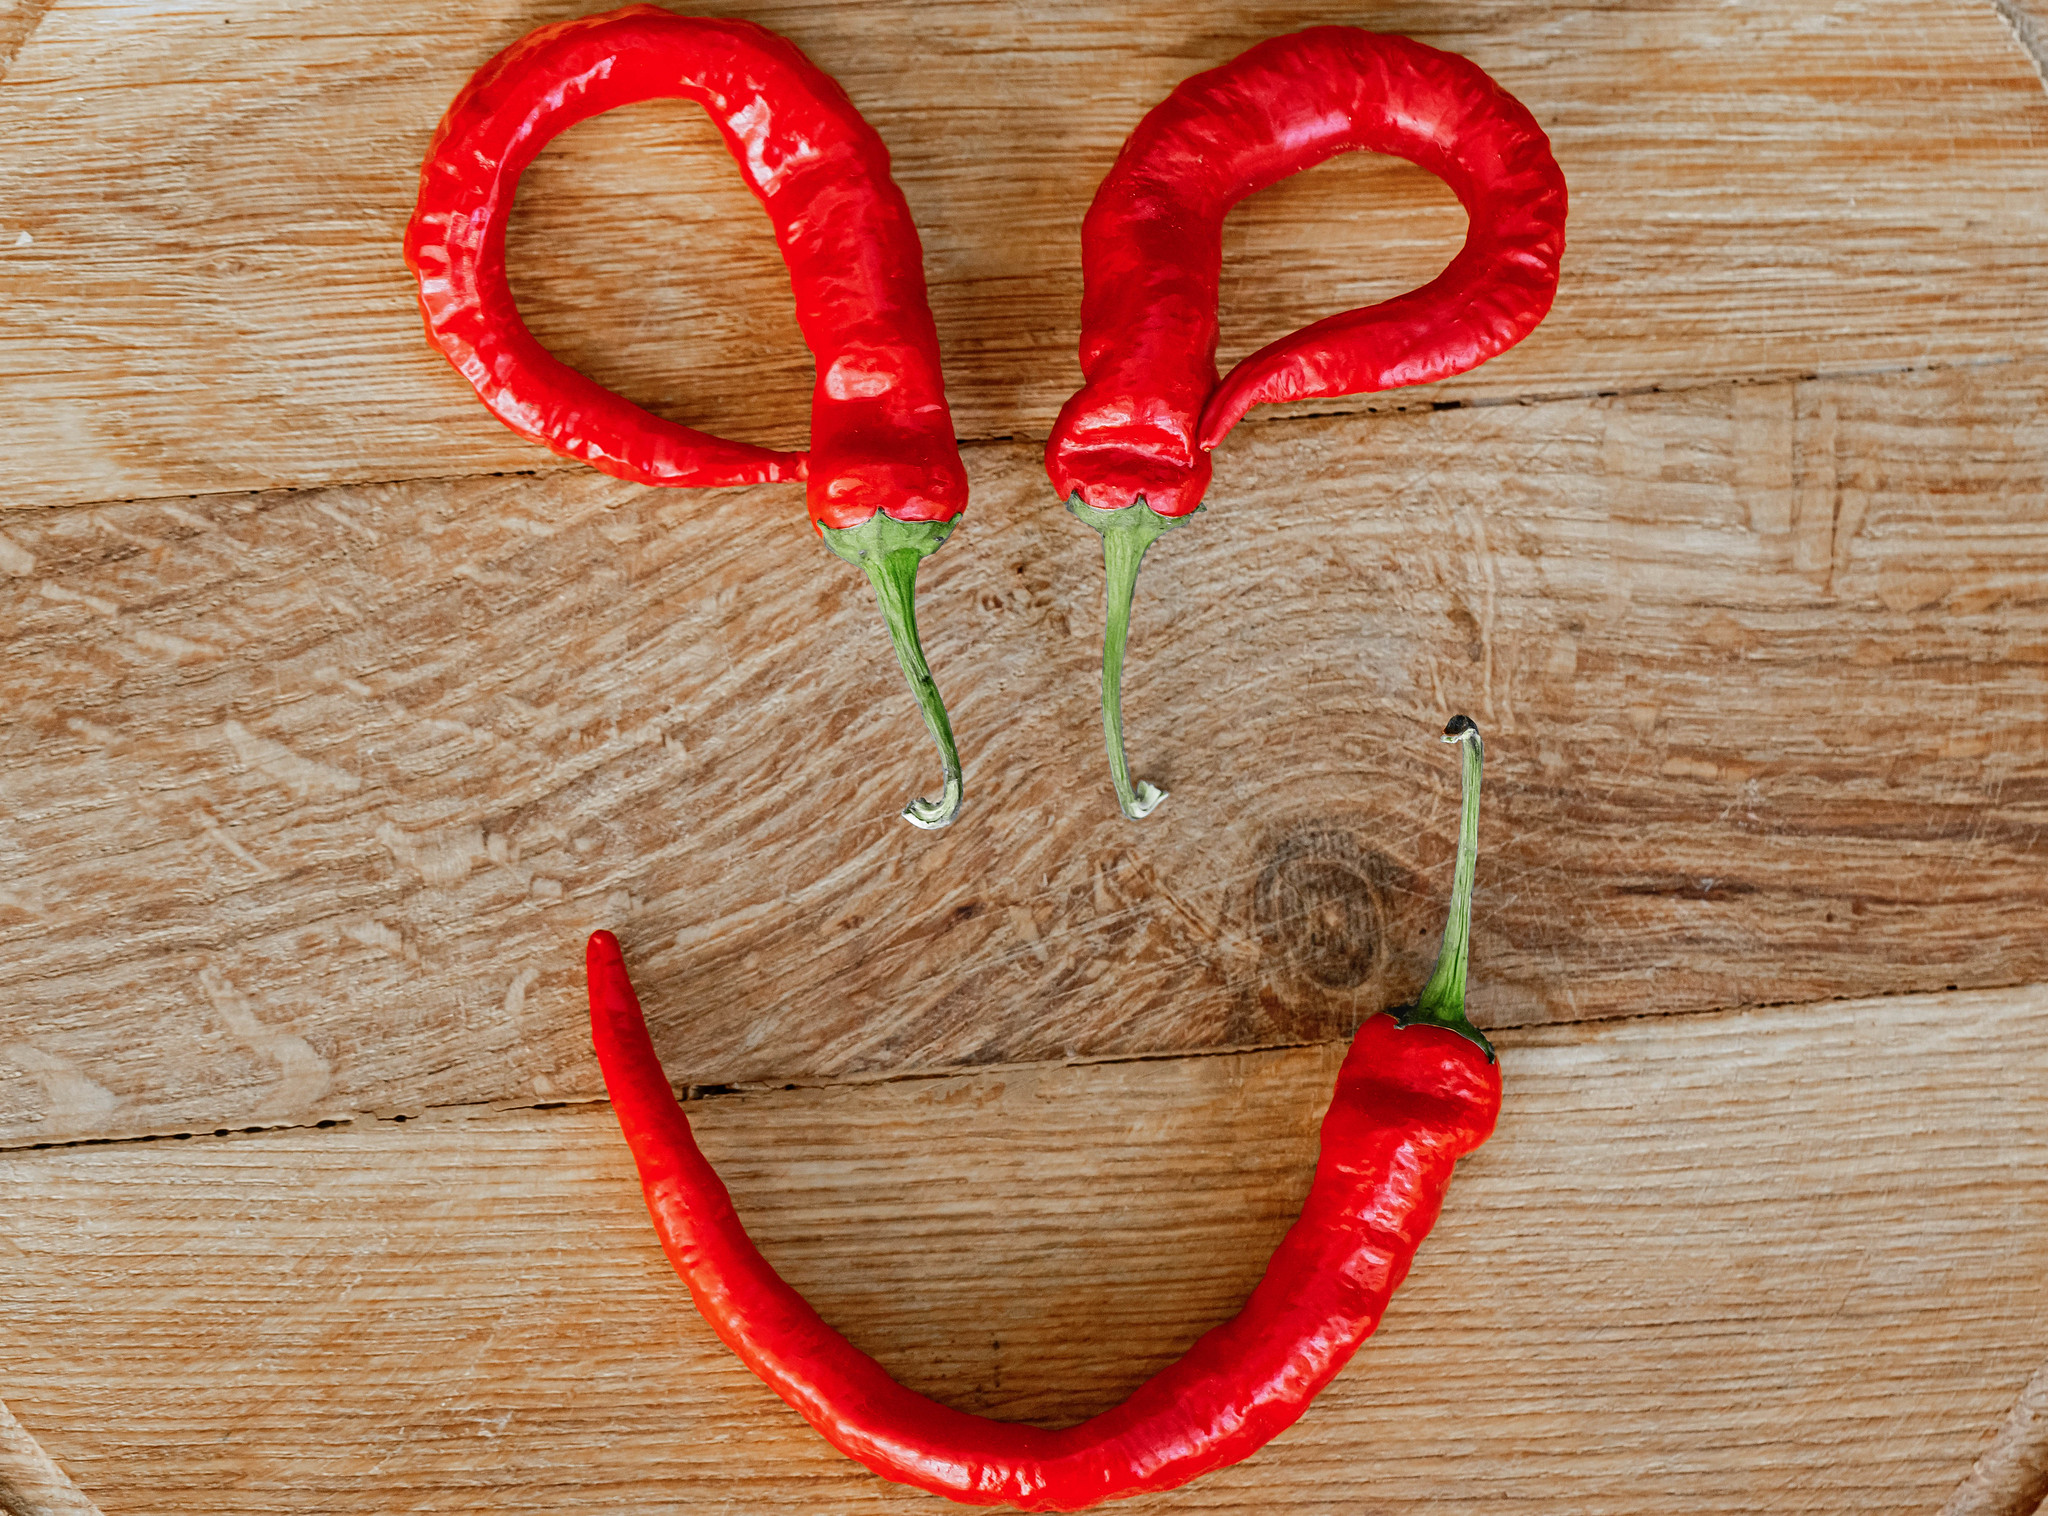 How spicy can you eat? Can you taste the hottest chili pepper in the world?